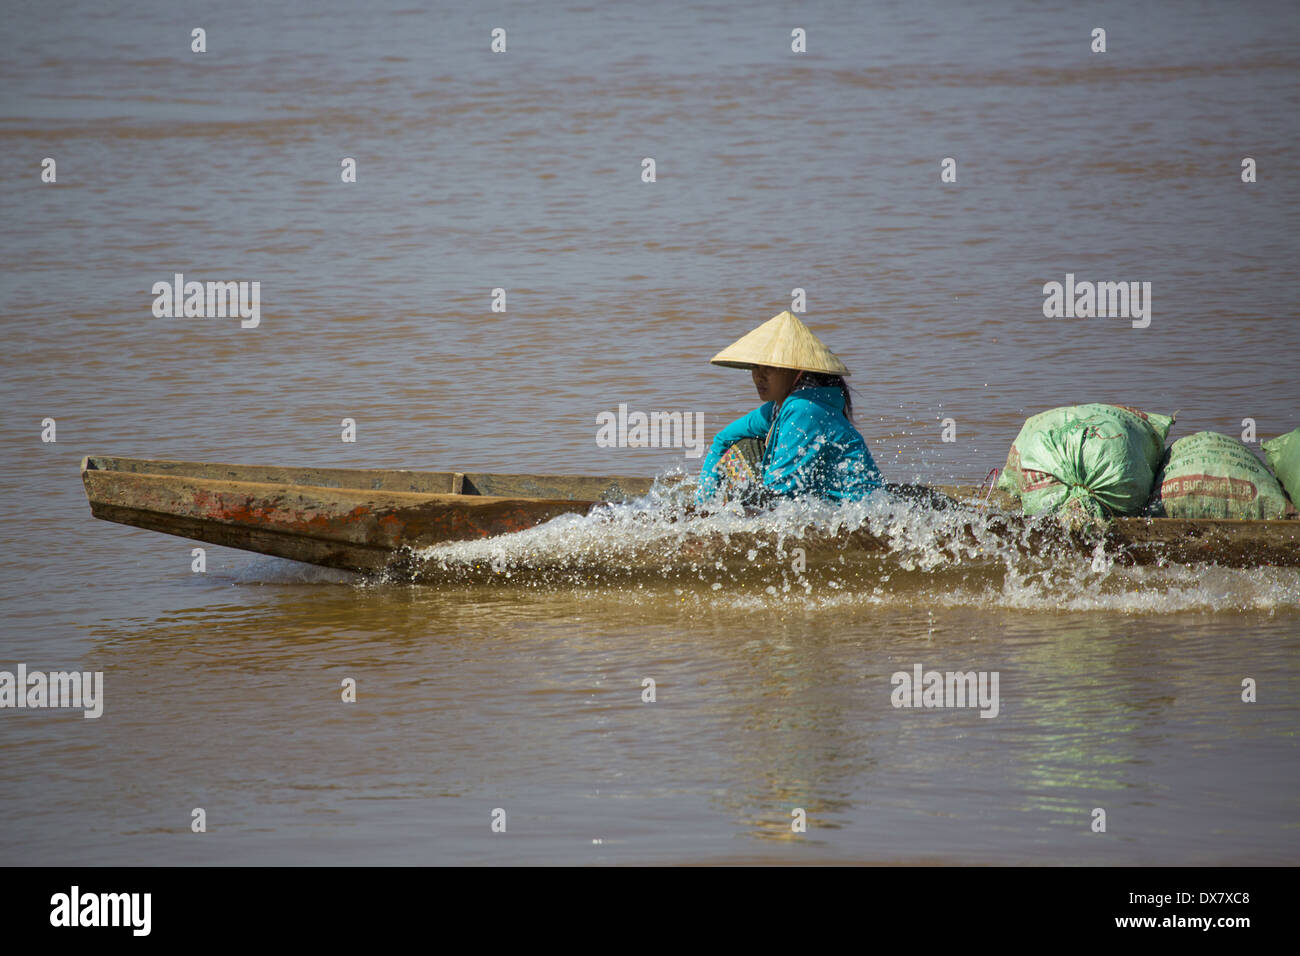 Don Det island in the Mekong River, 4000 Islands in Southern Laos Stock Photo